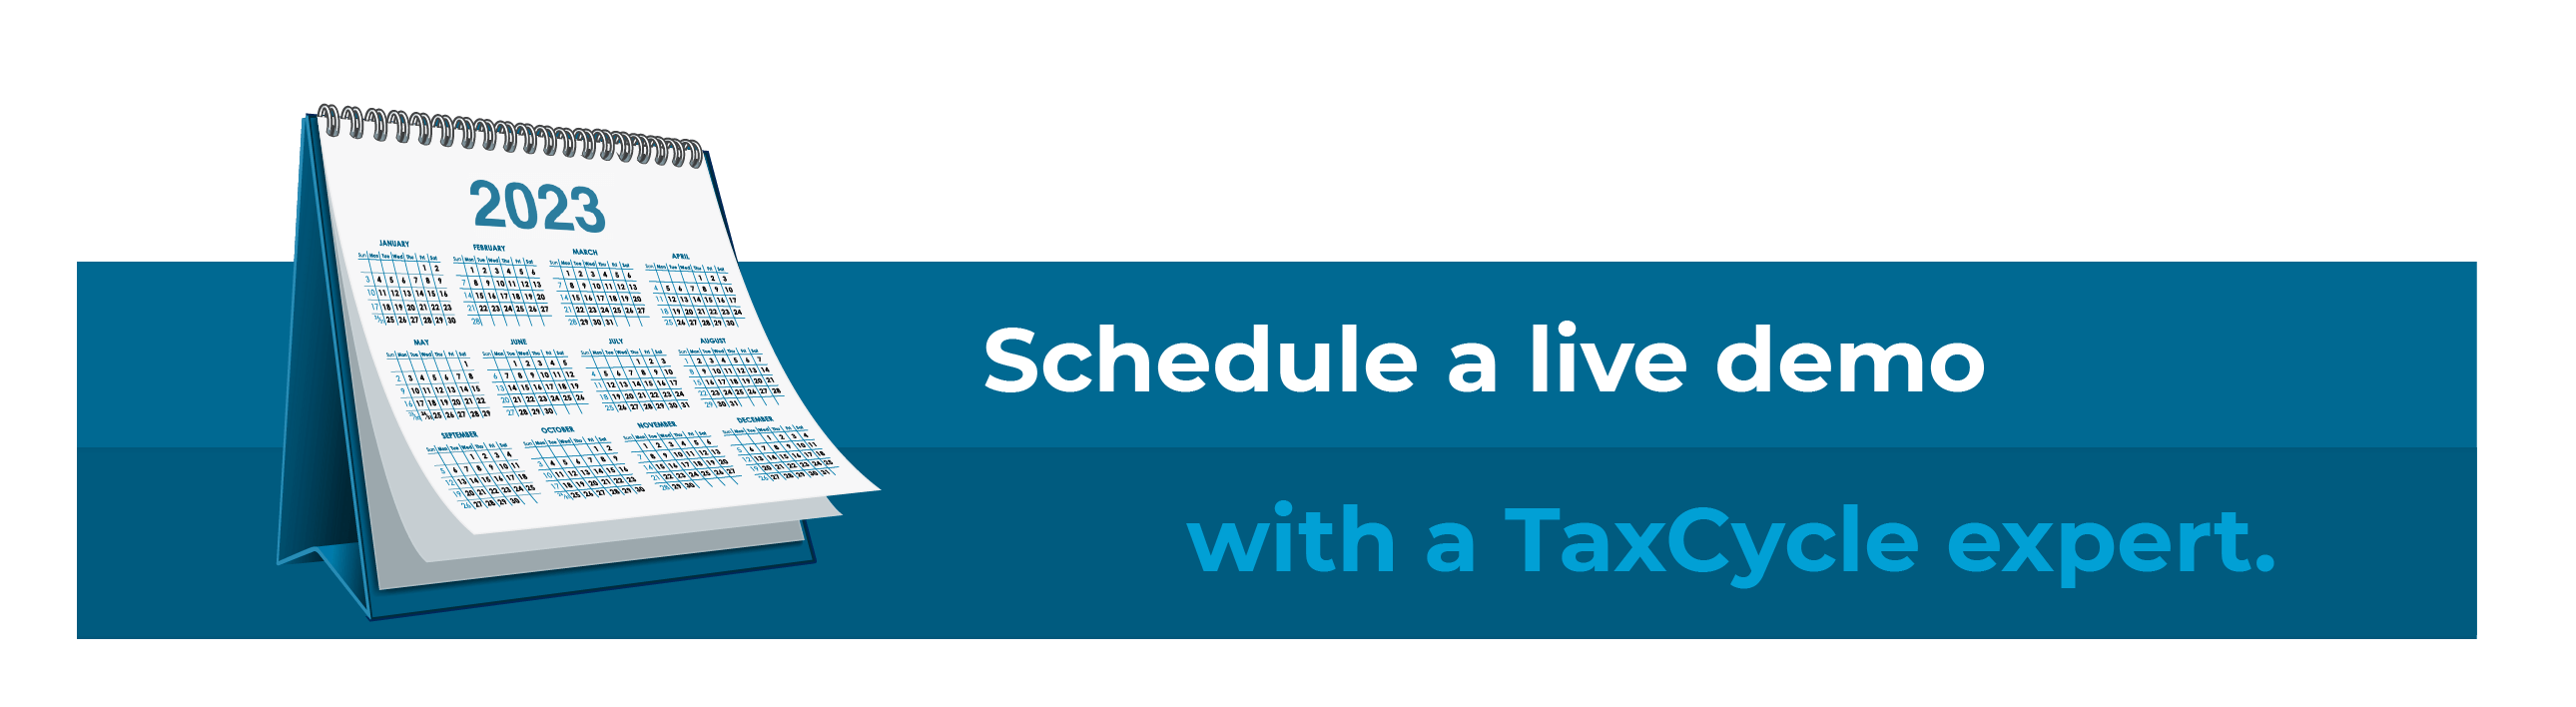 Schedule a Live Demo - TaxCycle